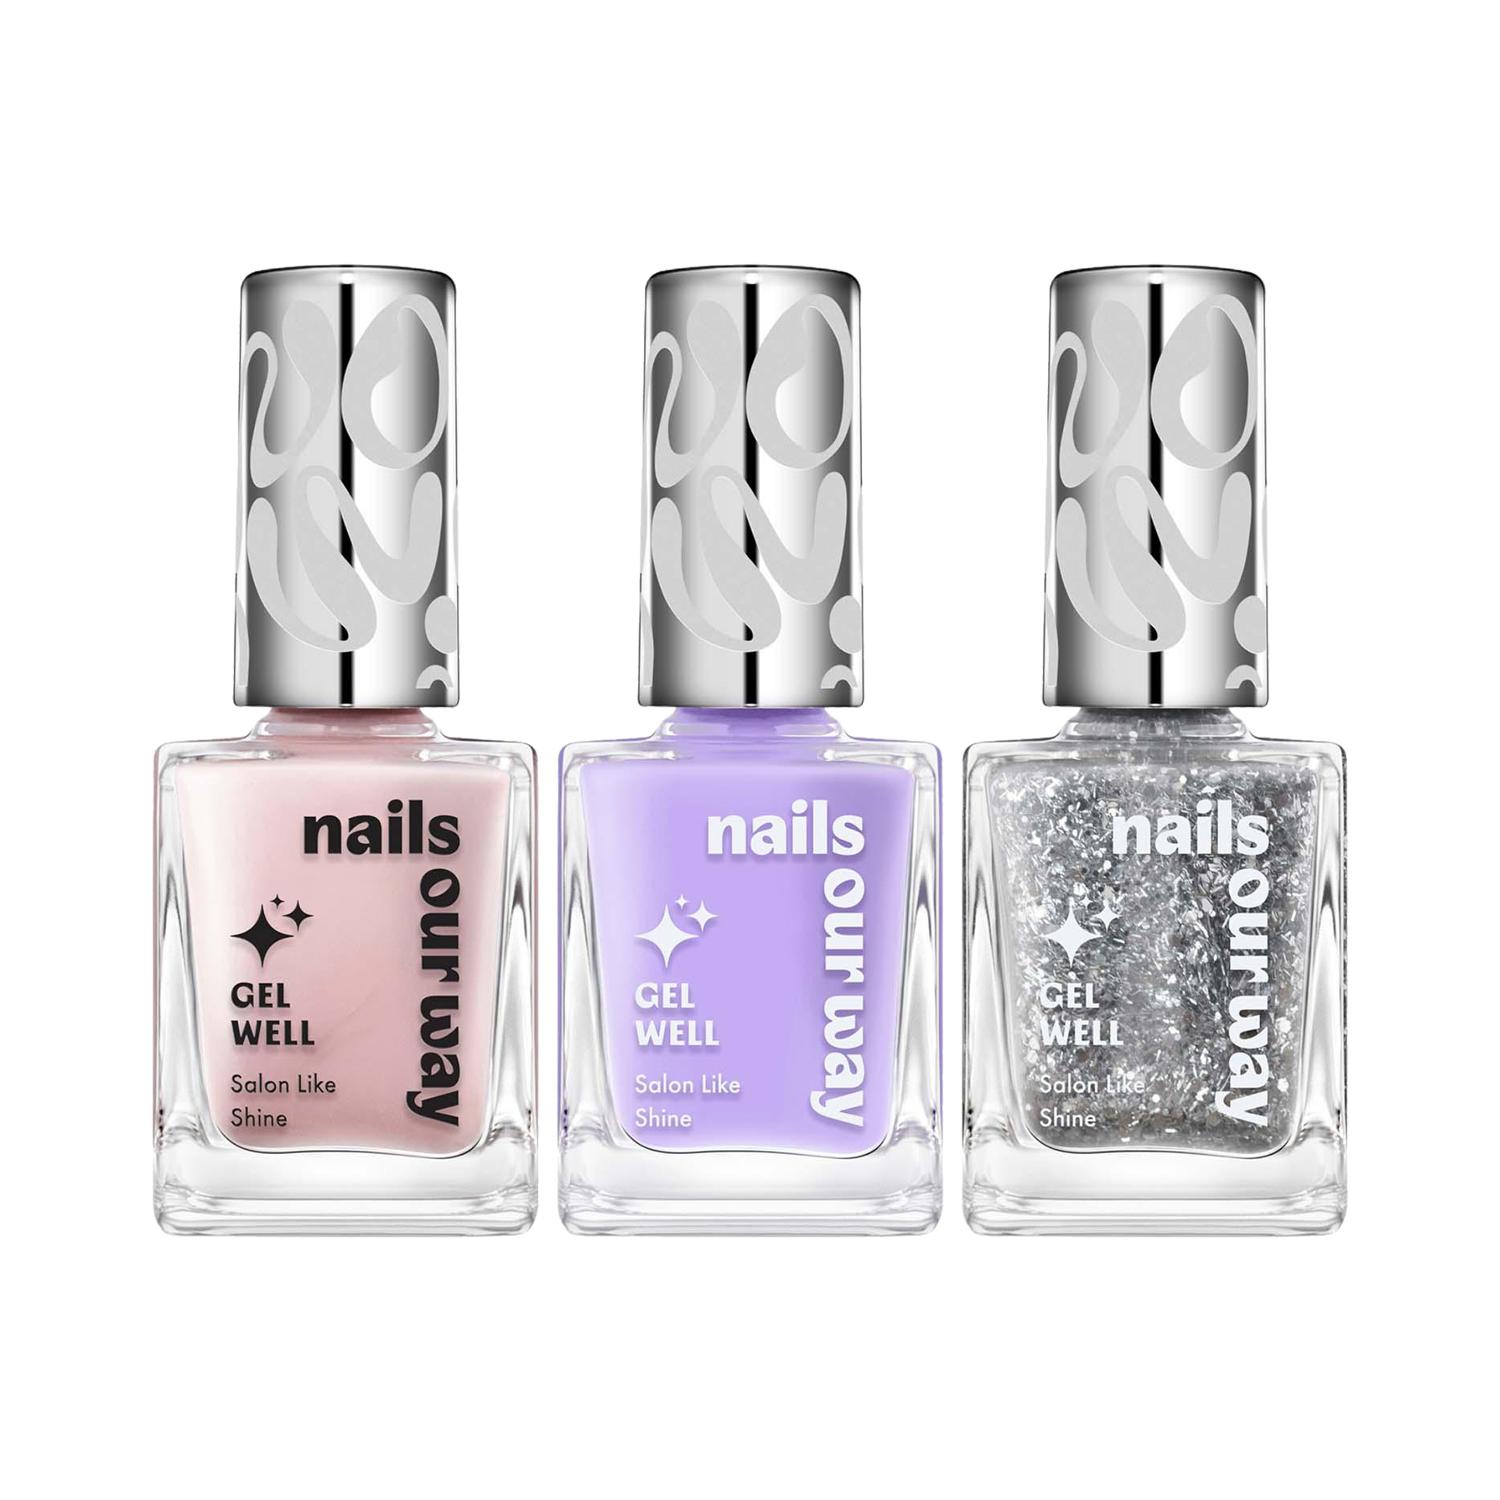 Nails Our Way | Nails Our Way Gel Well Nail Enamel Perfect Love Combo - Pk3